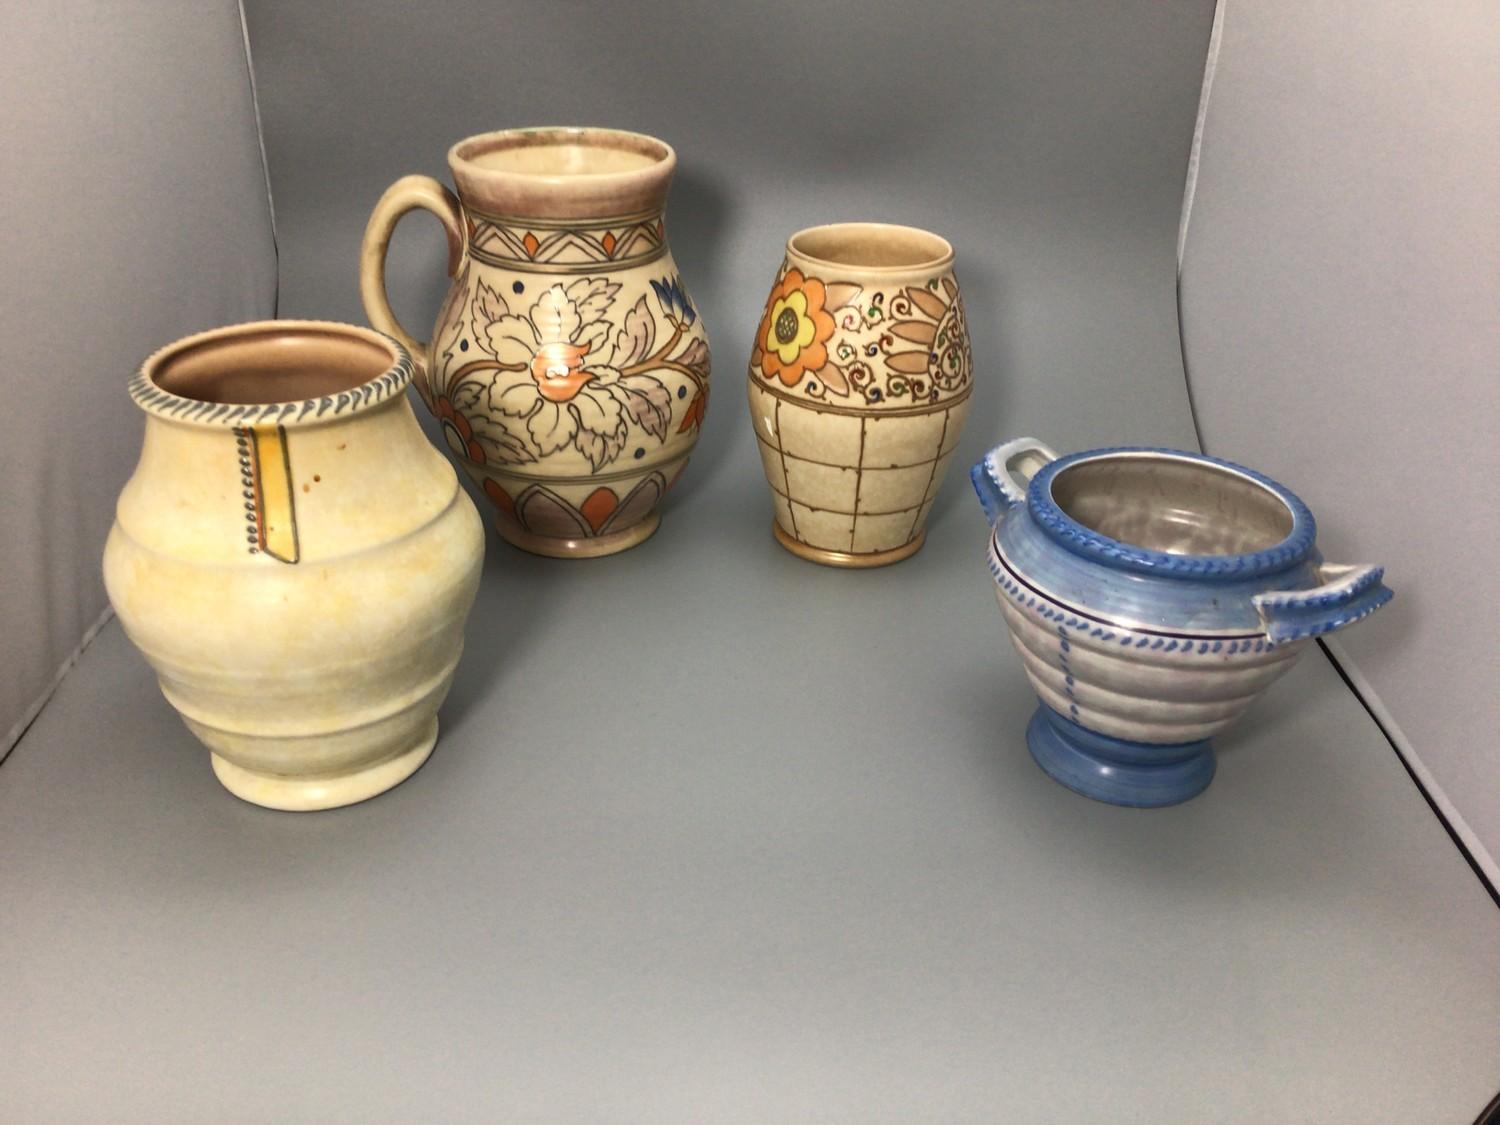 Four various vases including a Bursley Ware by Charlotte Rhead vase no. TL3 'Trellis', 17.5cm - Image 2 of 4